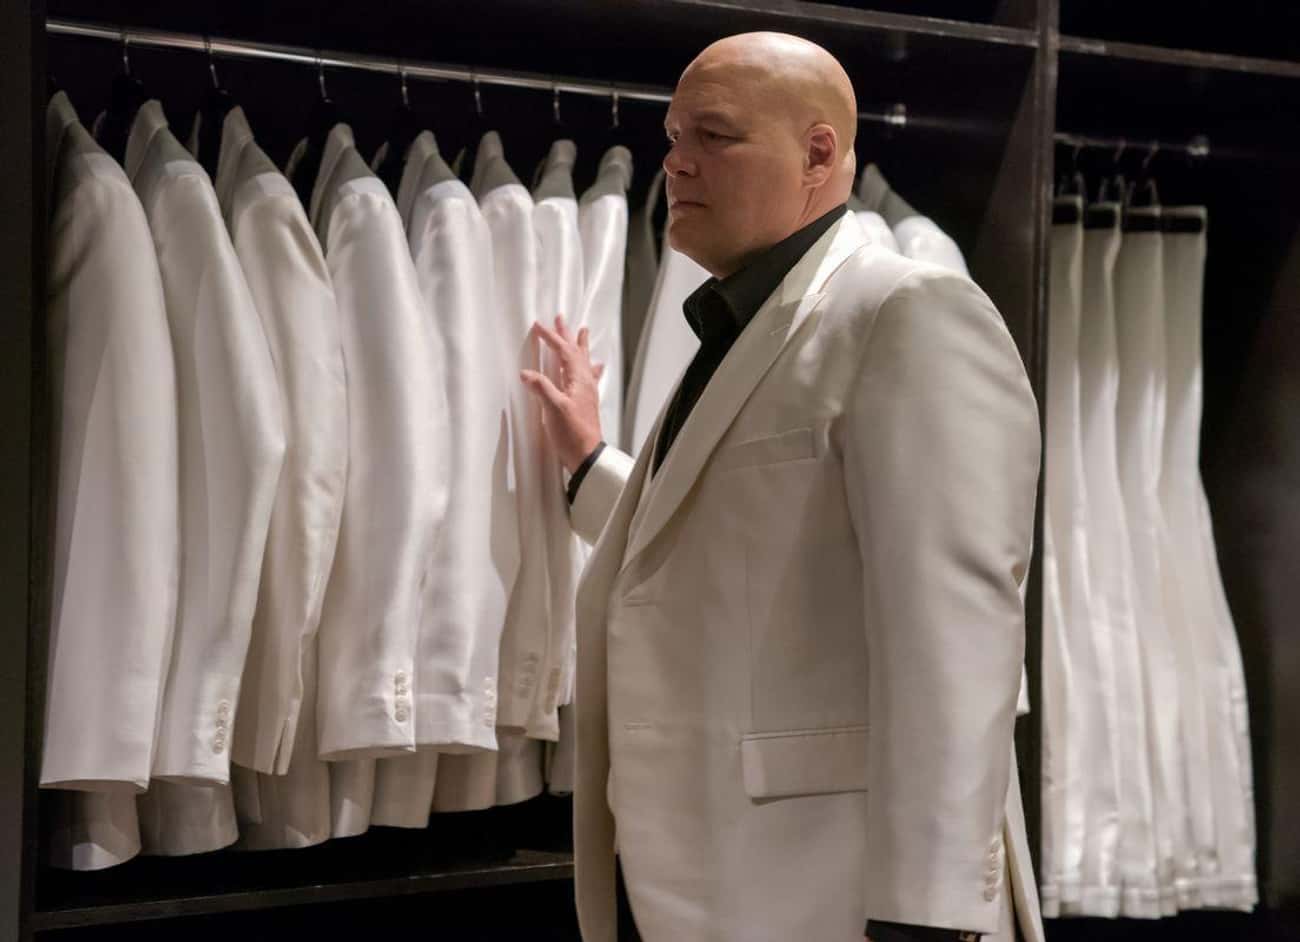 The Kingpin Should Confront That Other Red-Clad Superhero From New York